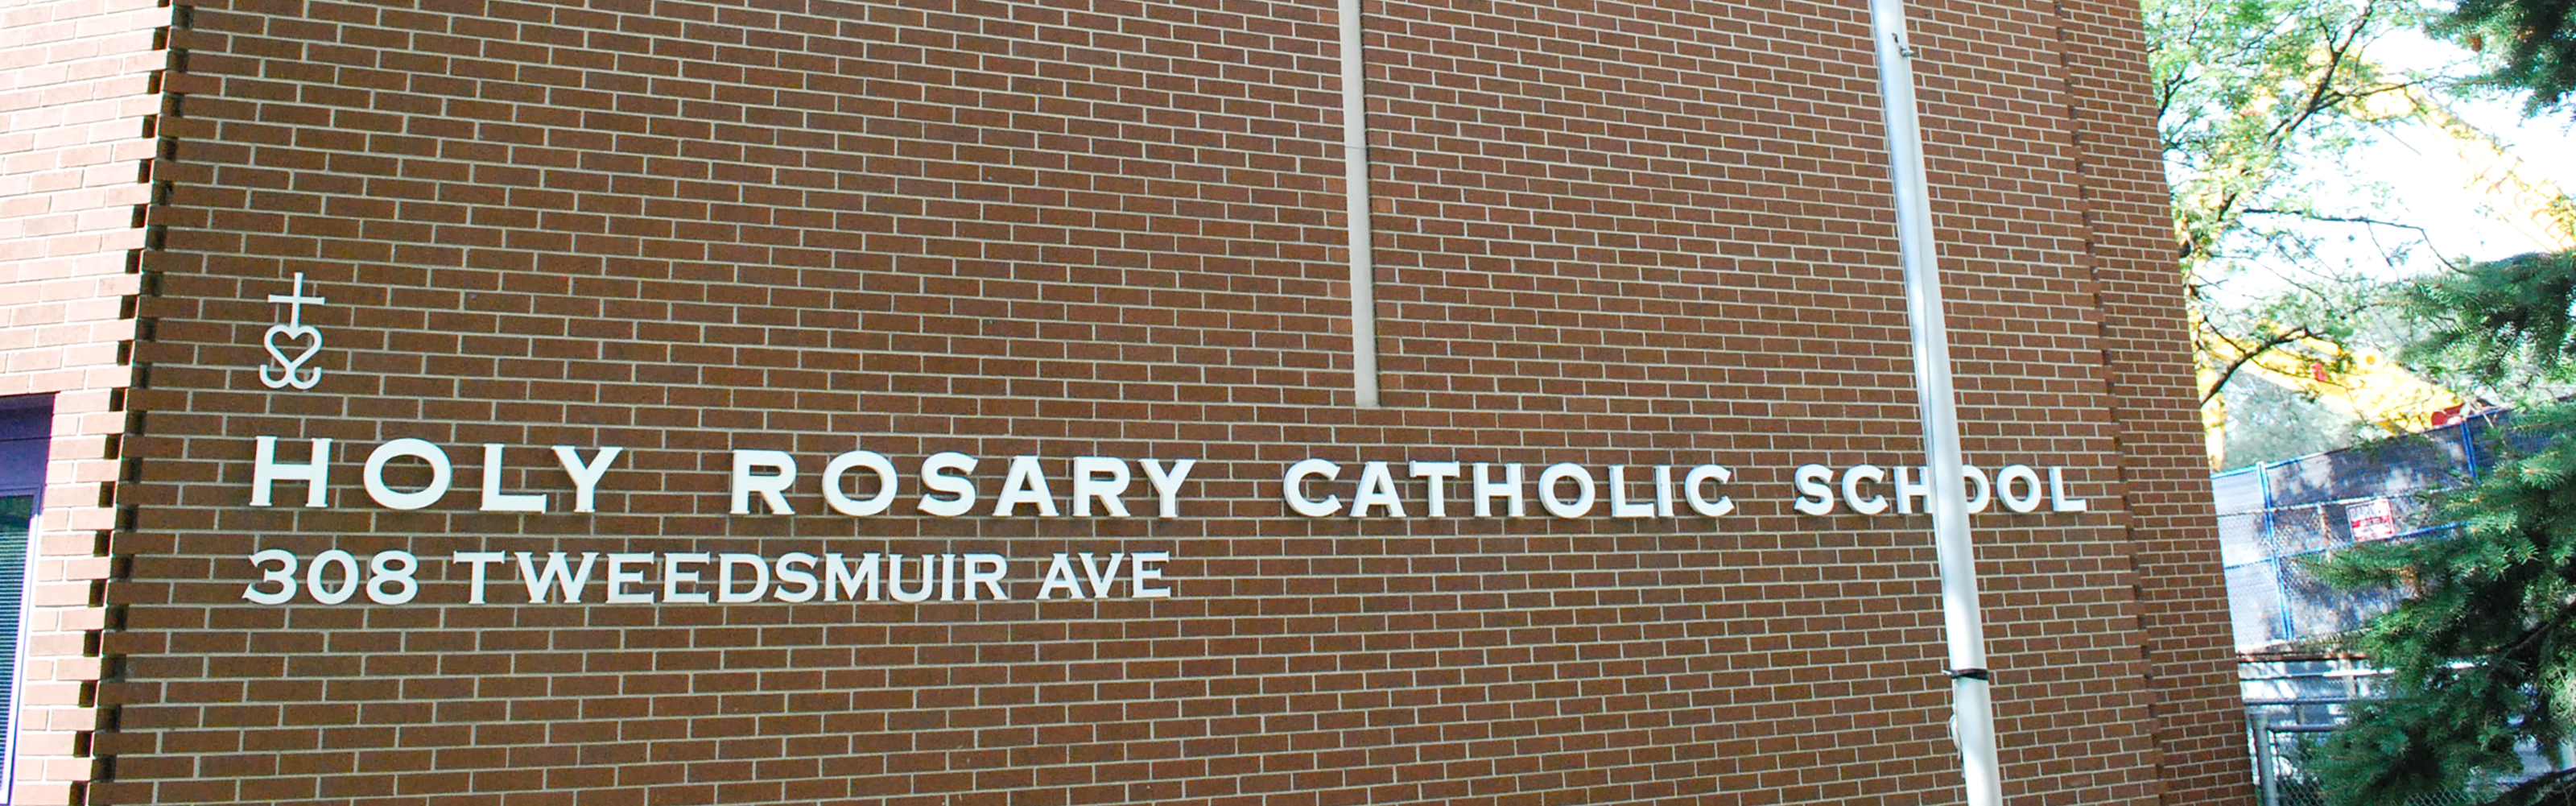 Front of the Holy Rosary Catholic School building